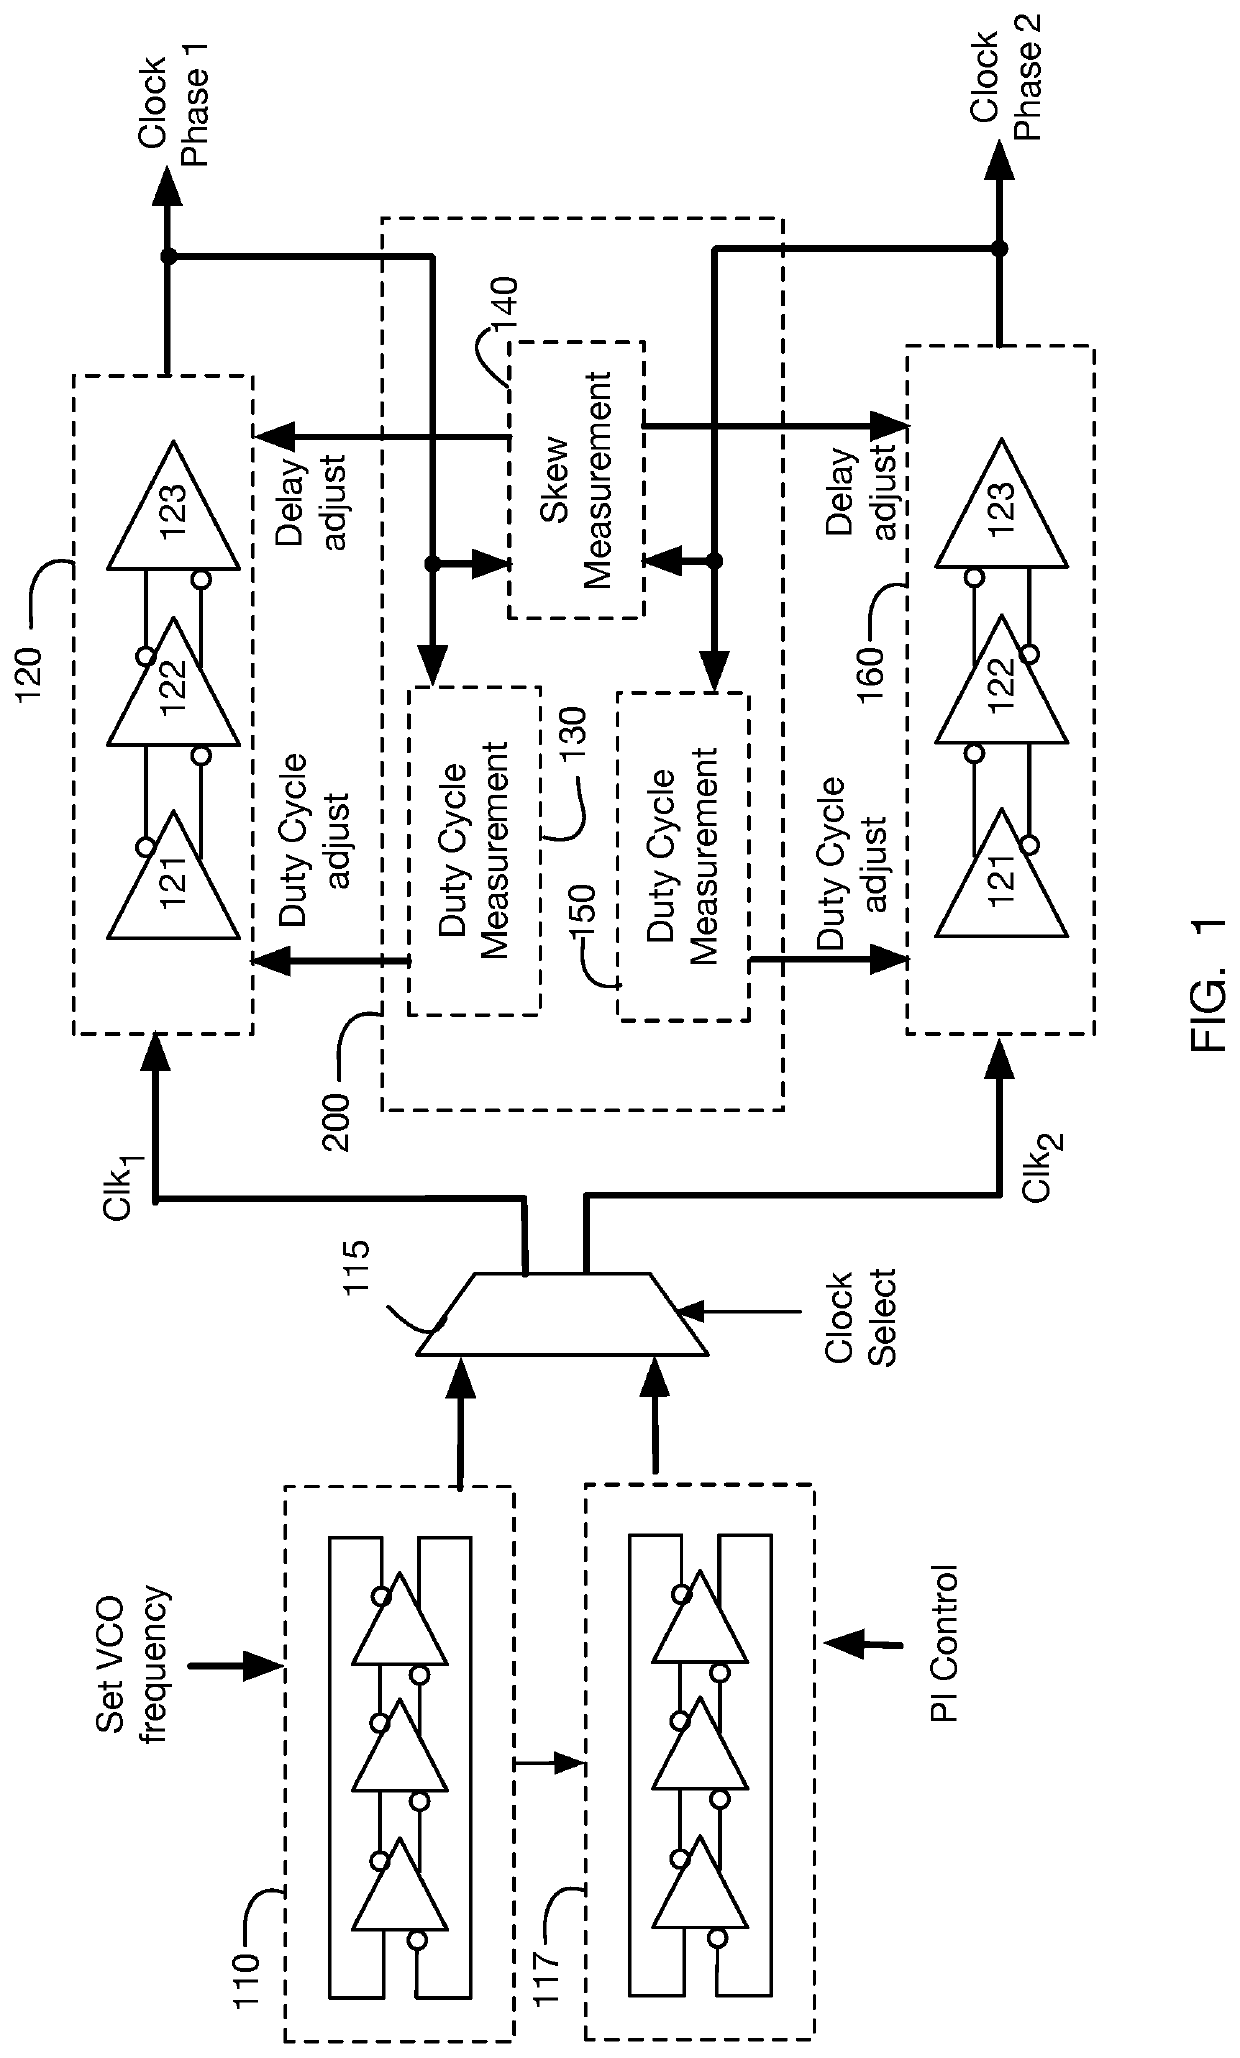 Measurement and correction of multiphase clock duty cycle and skew